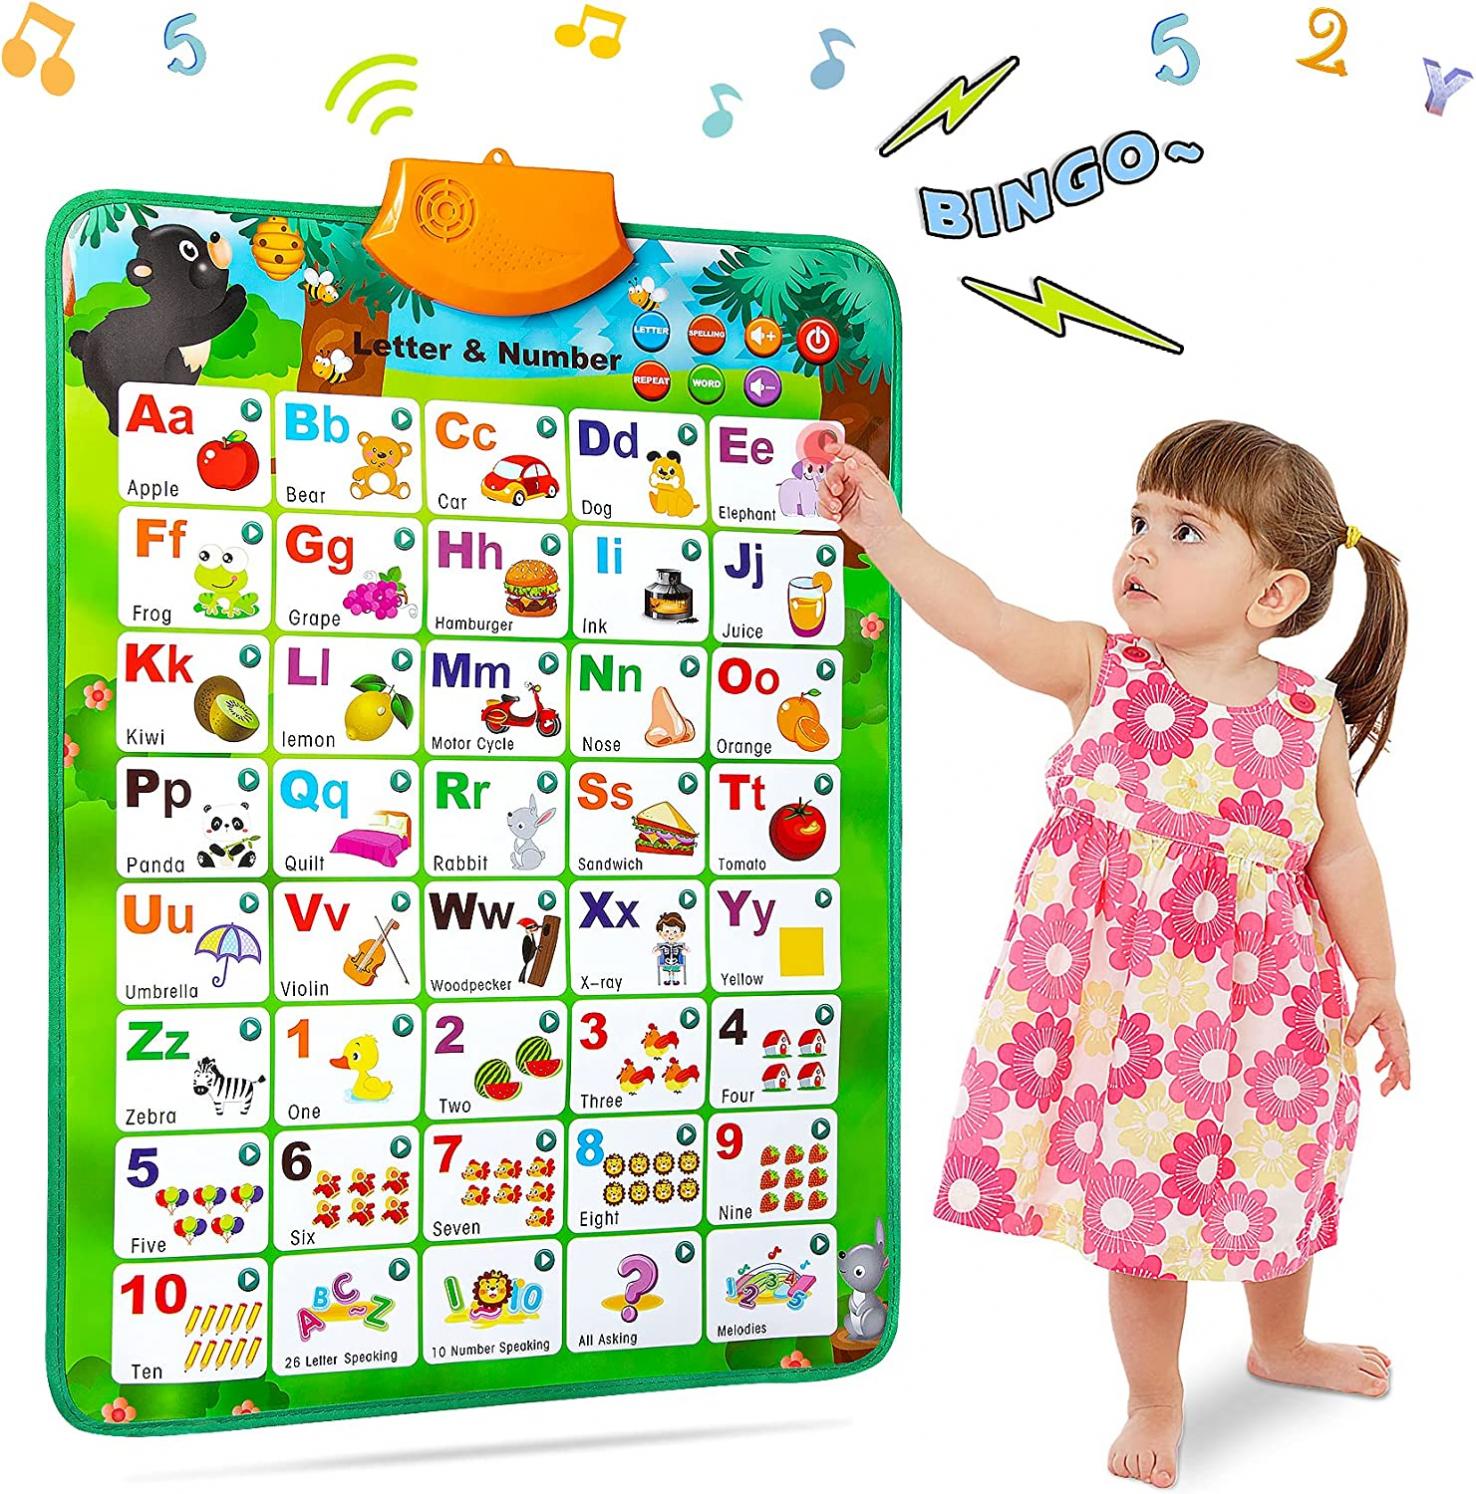 NARRIO Educational Toys for 2 3 4 Year Old Boys Gifts, Interactive Alphabet Wall Chart Learning ABC Poster for Kids Ages 2-5, Christmas Birthday Gifts for 2-4 Year Old Girls Toys for Toddler Age 1-3